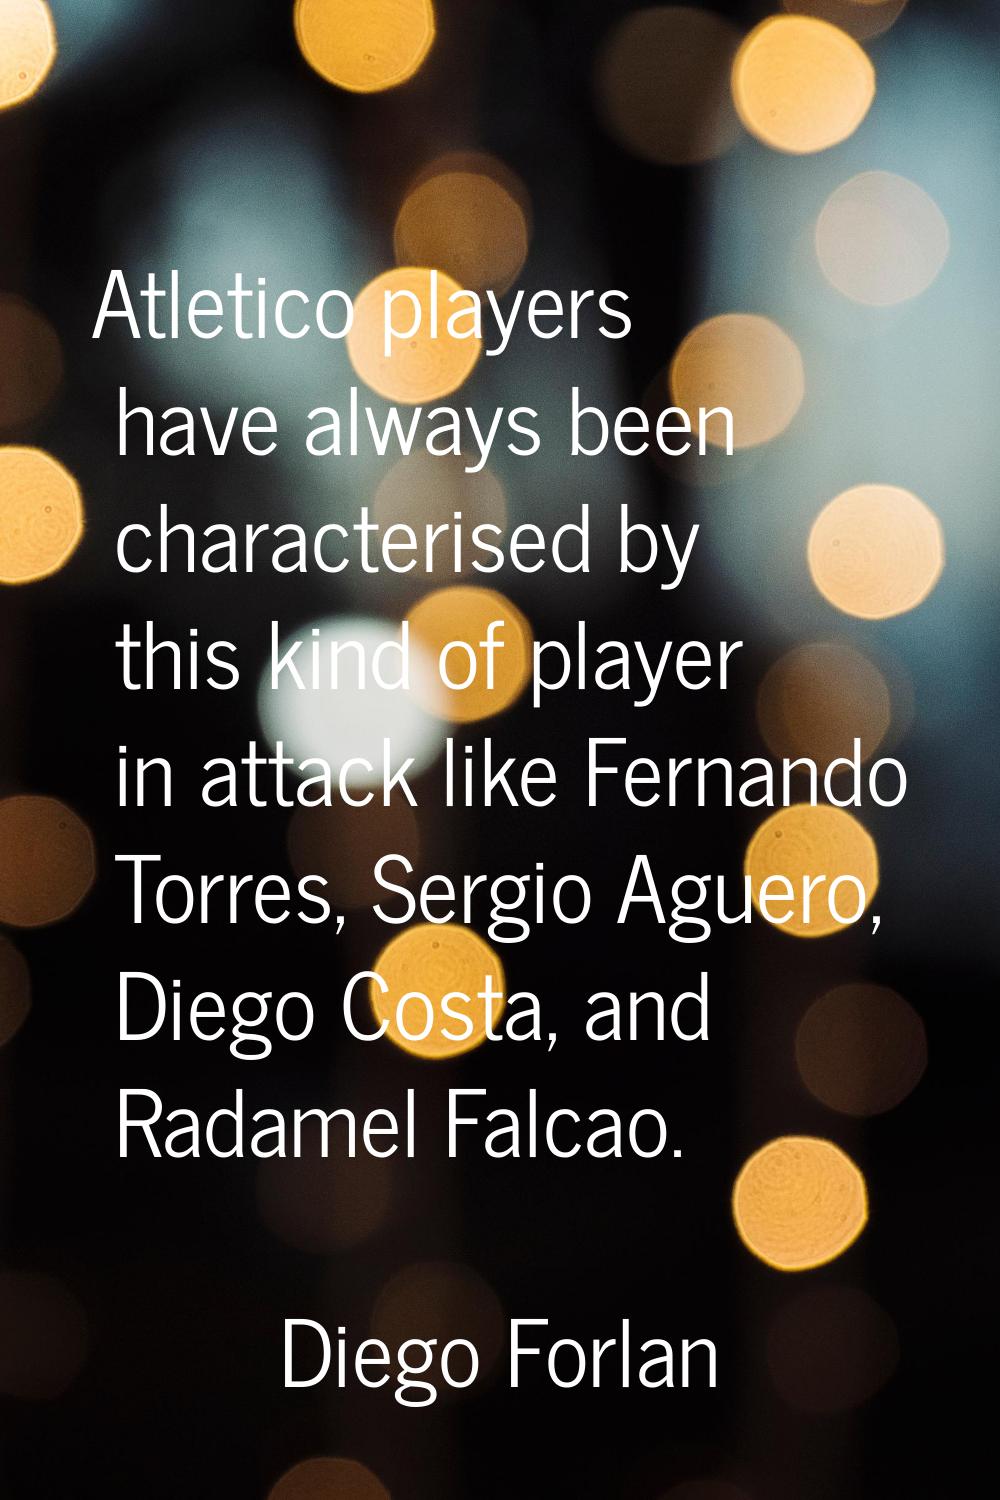 Atletico players have always been characterised by this kind of player in attack like Fernando Torr